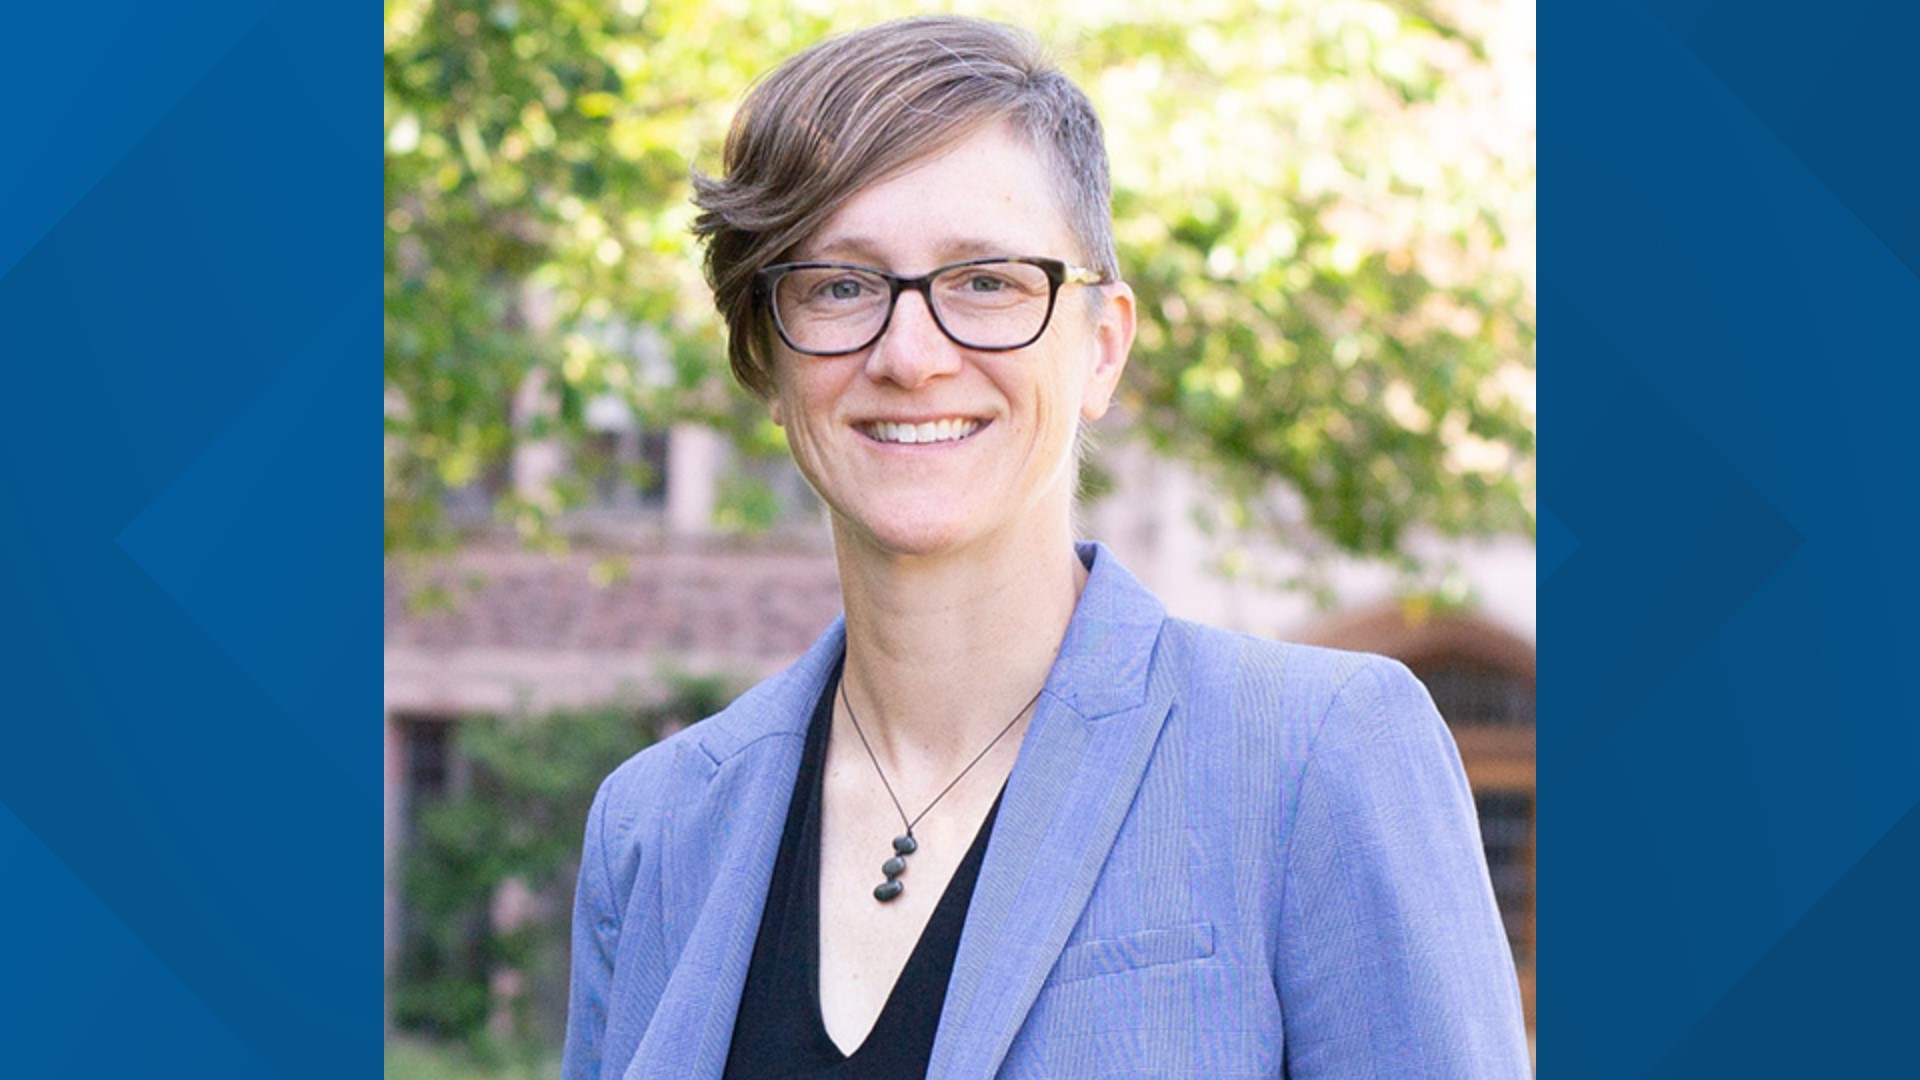 University of Washington Professor Kate Starbird is an expert in spotting and rooting out misinformation, as well as disinformation online.